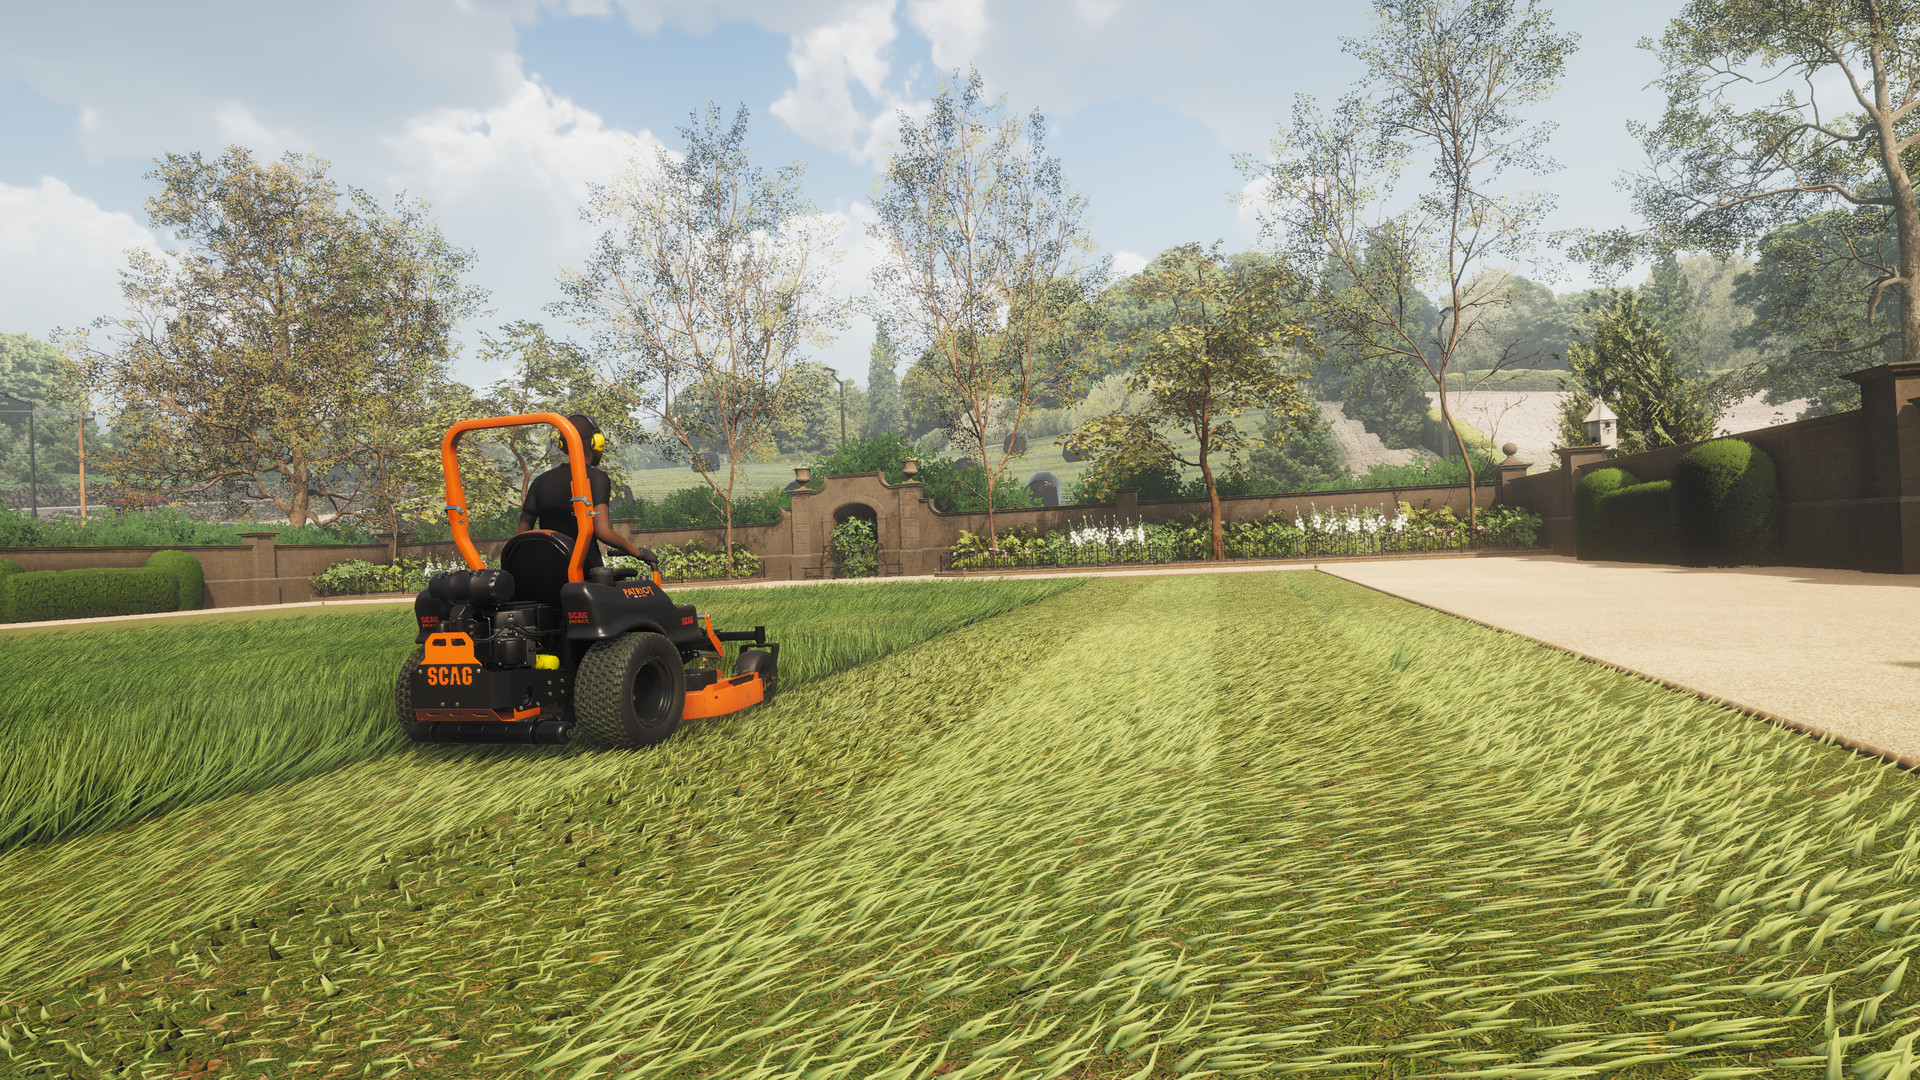 Lawn Mowing Simulator on Steam | PS5-Spiele